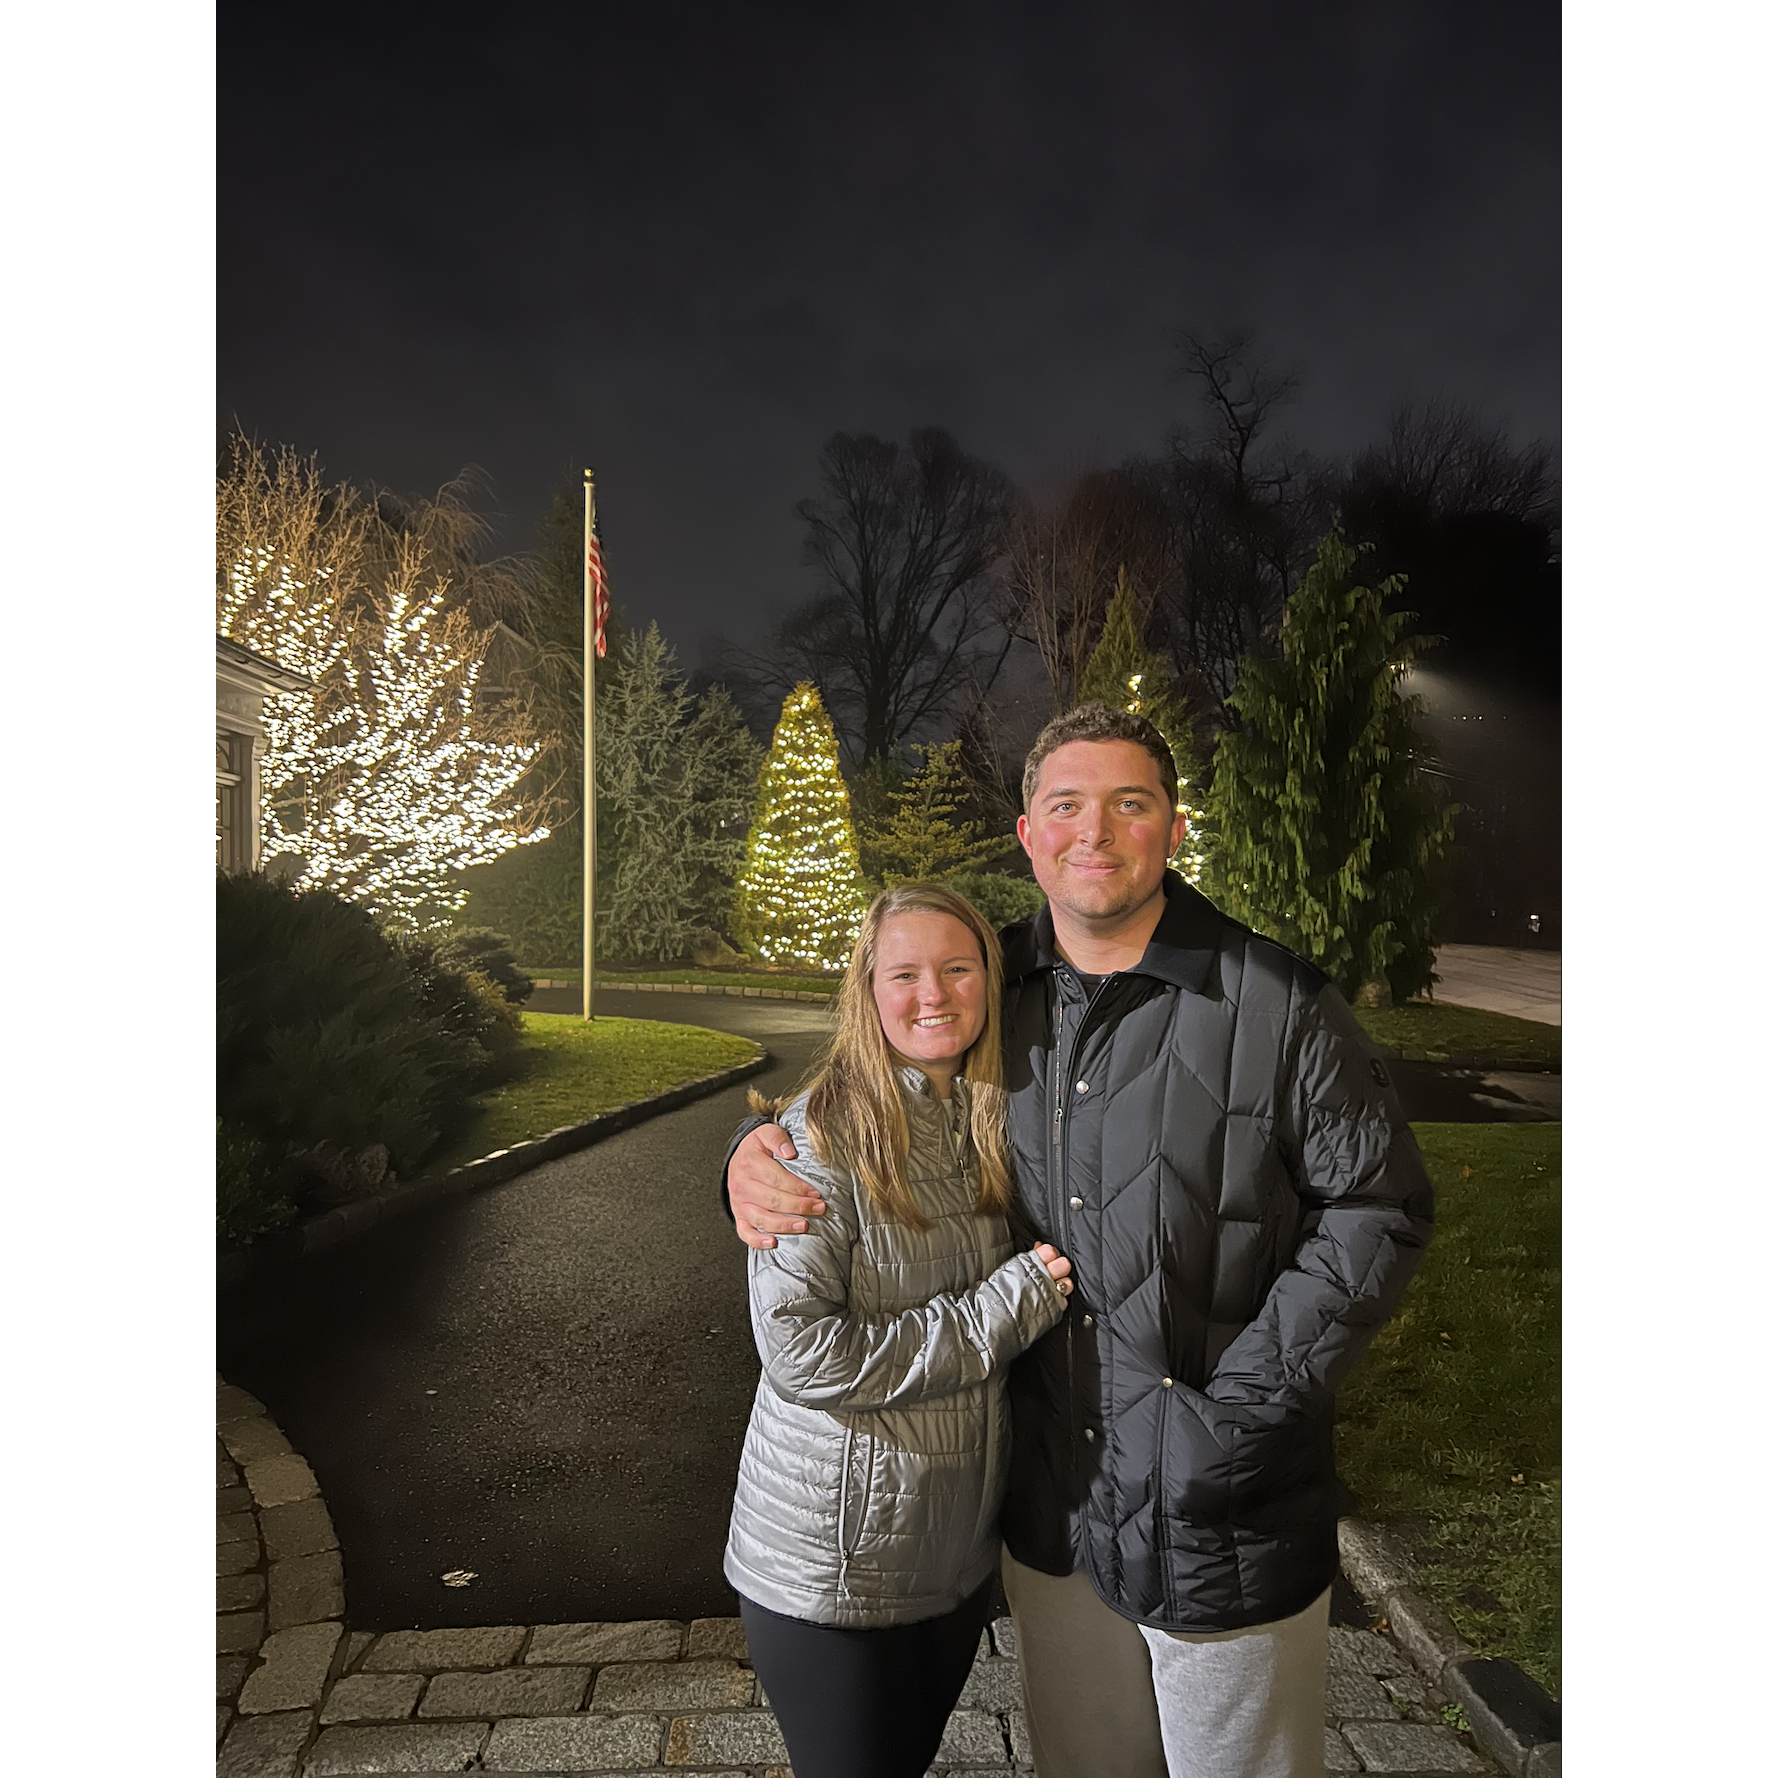 December 2021: Our first Christmas together in Connecticut